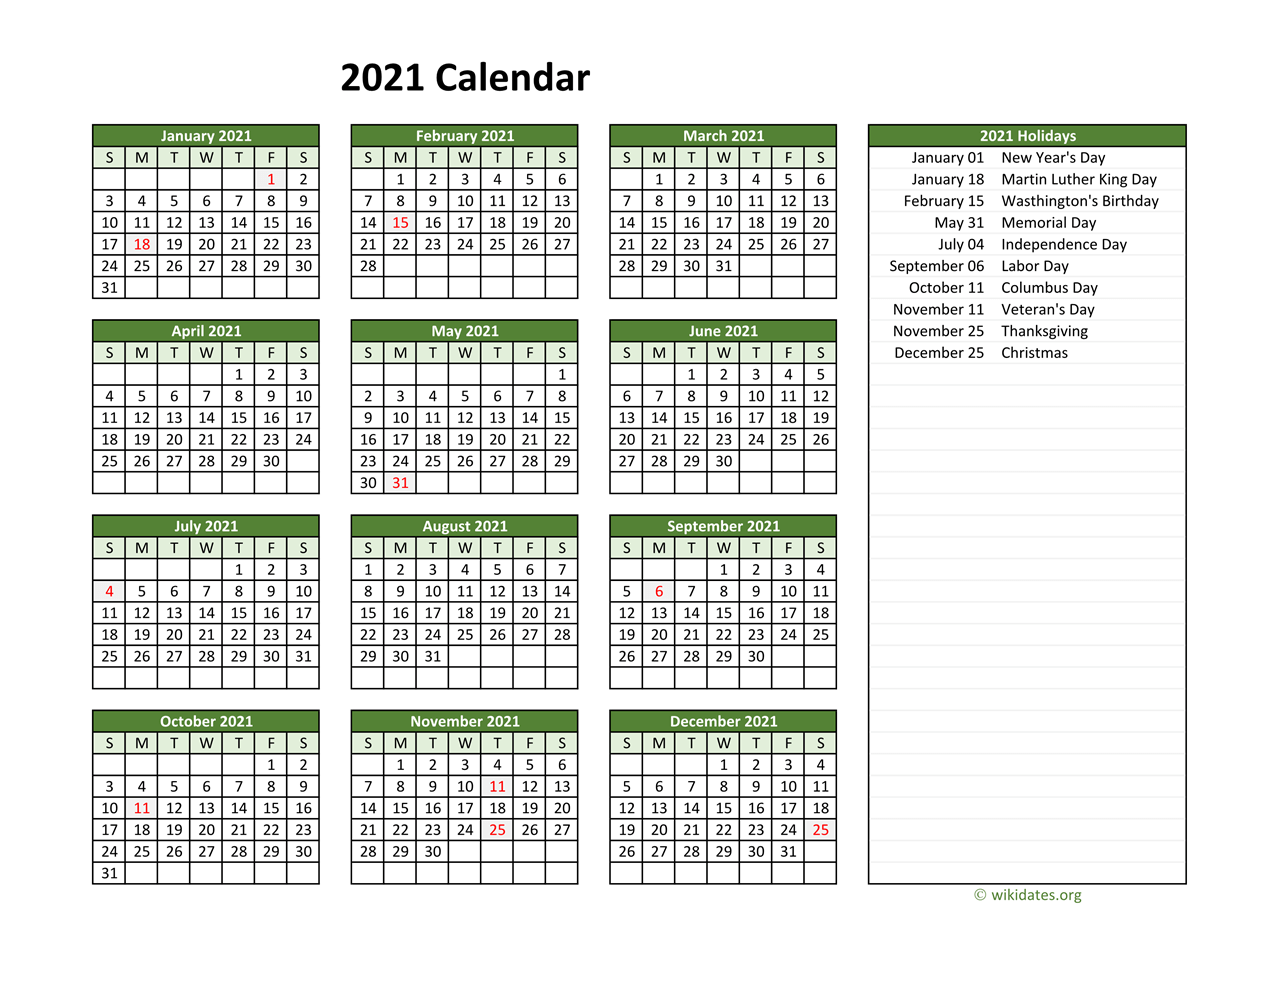 Printable 2021 Calendar With Federal Holidays Wikidates Org